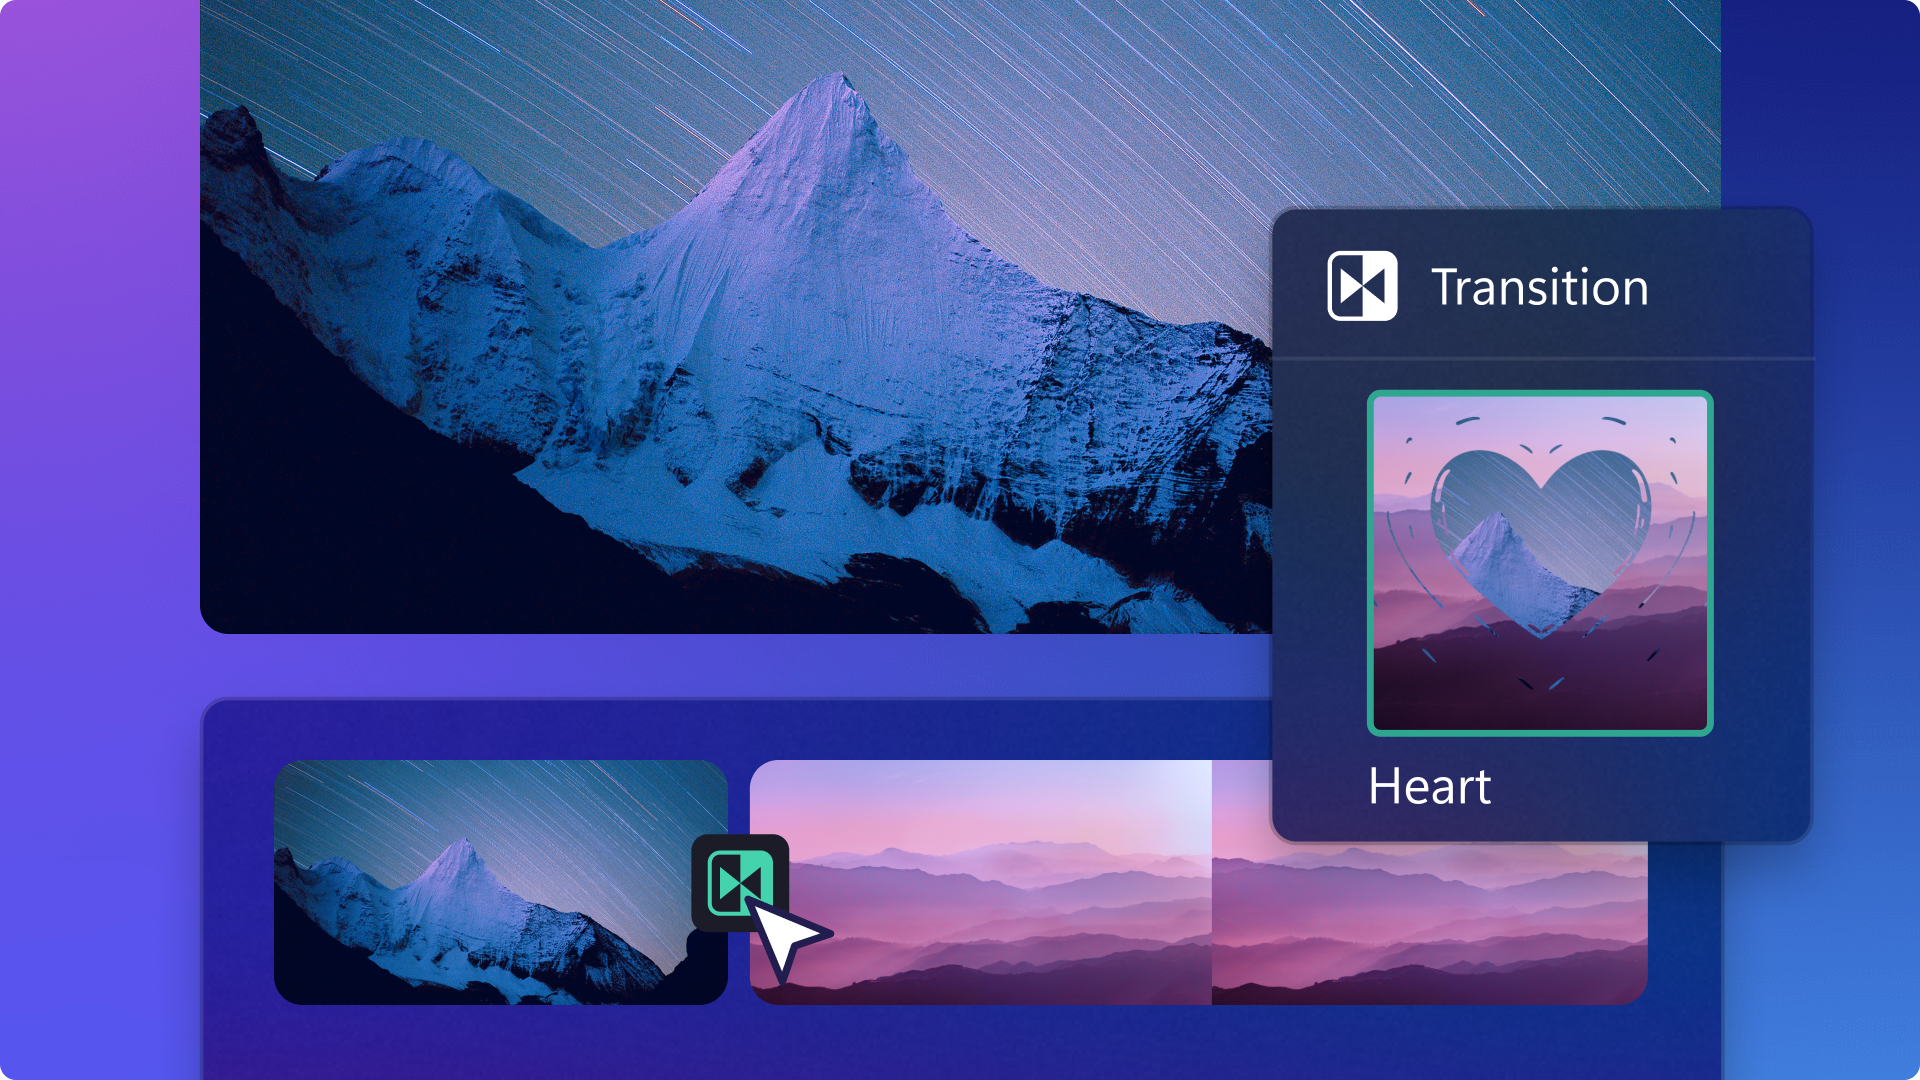 Abstract image of Heart transition being added to videos in Clipchamp